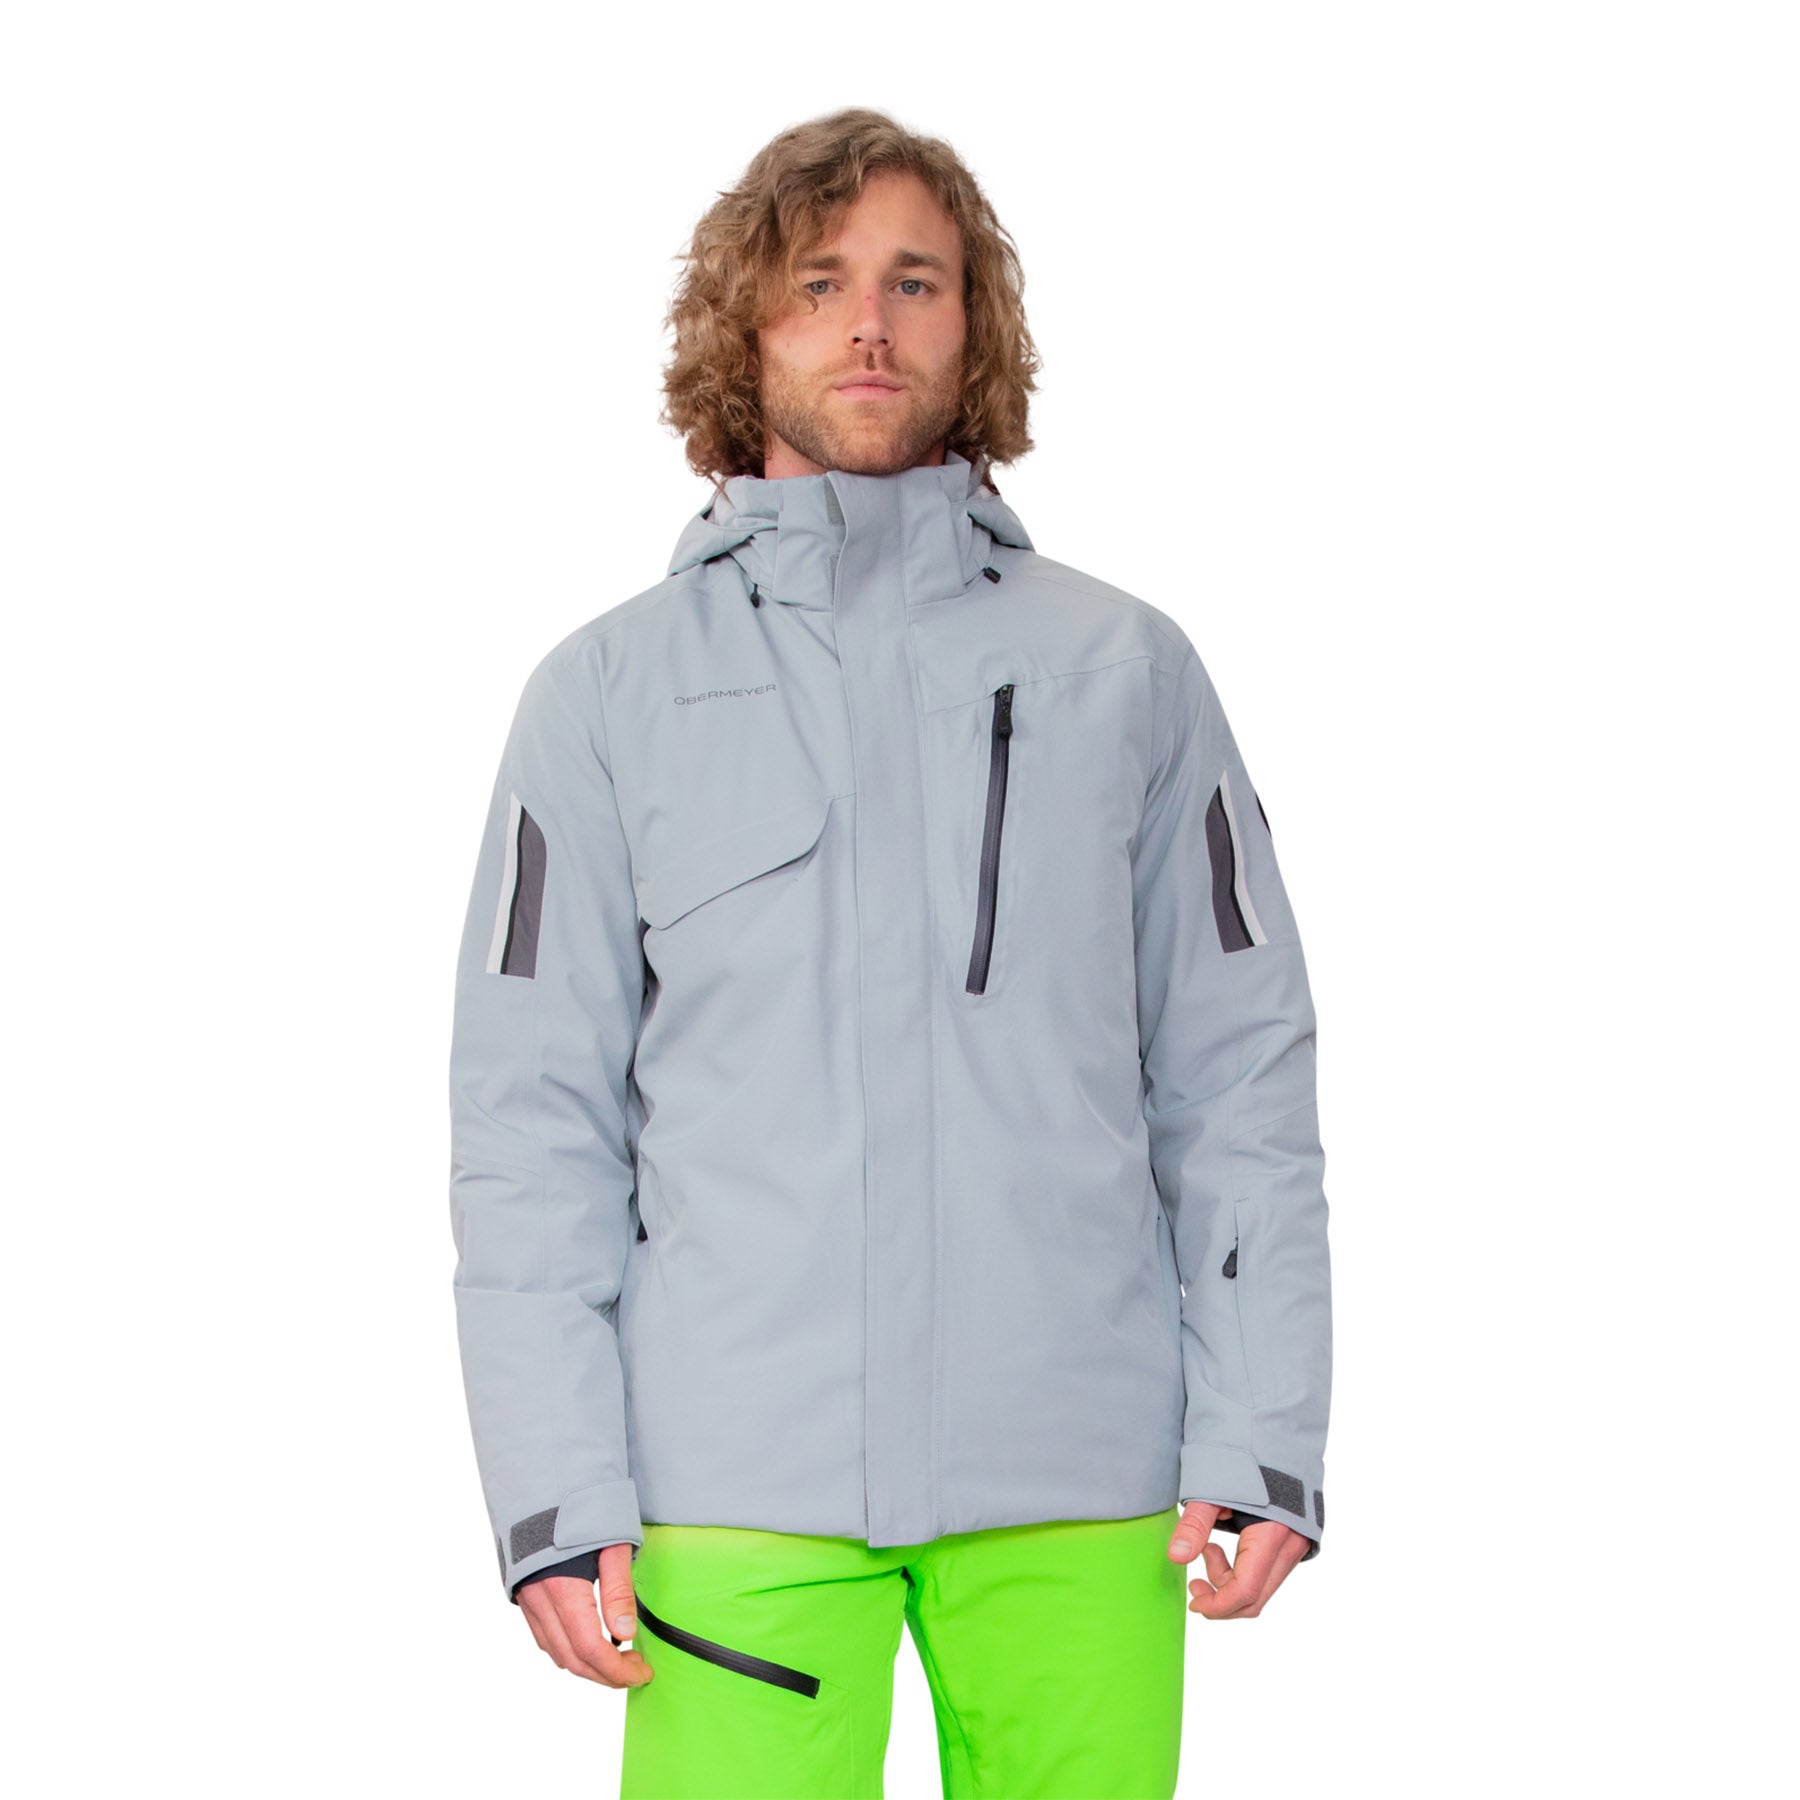 Hero image featuring a model wearing the Obermeyer Primo Jacket in shale grey with bright green ski pants.